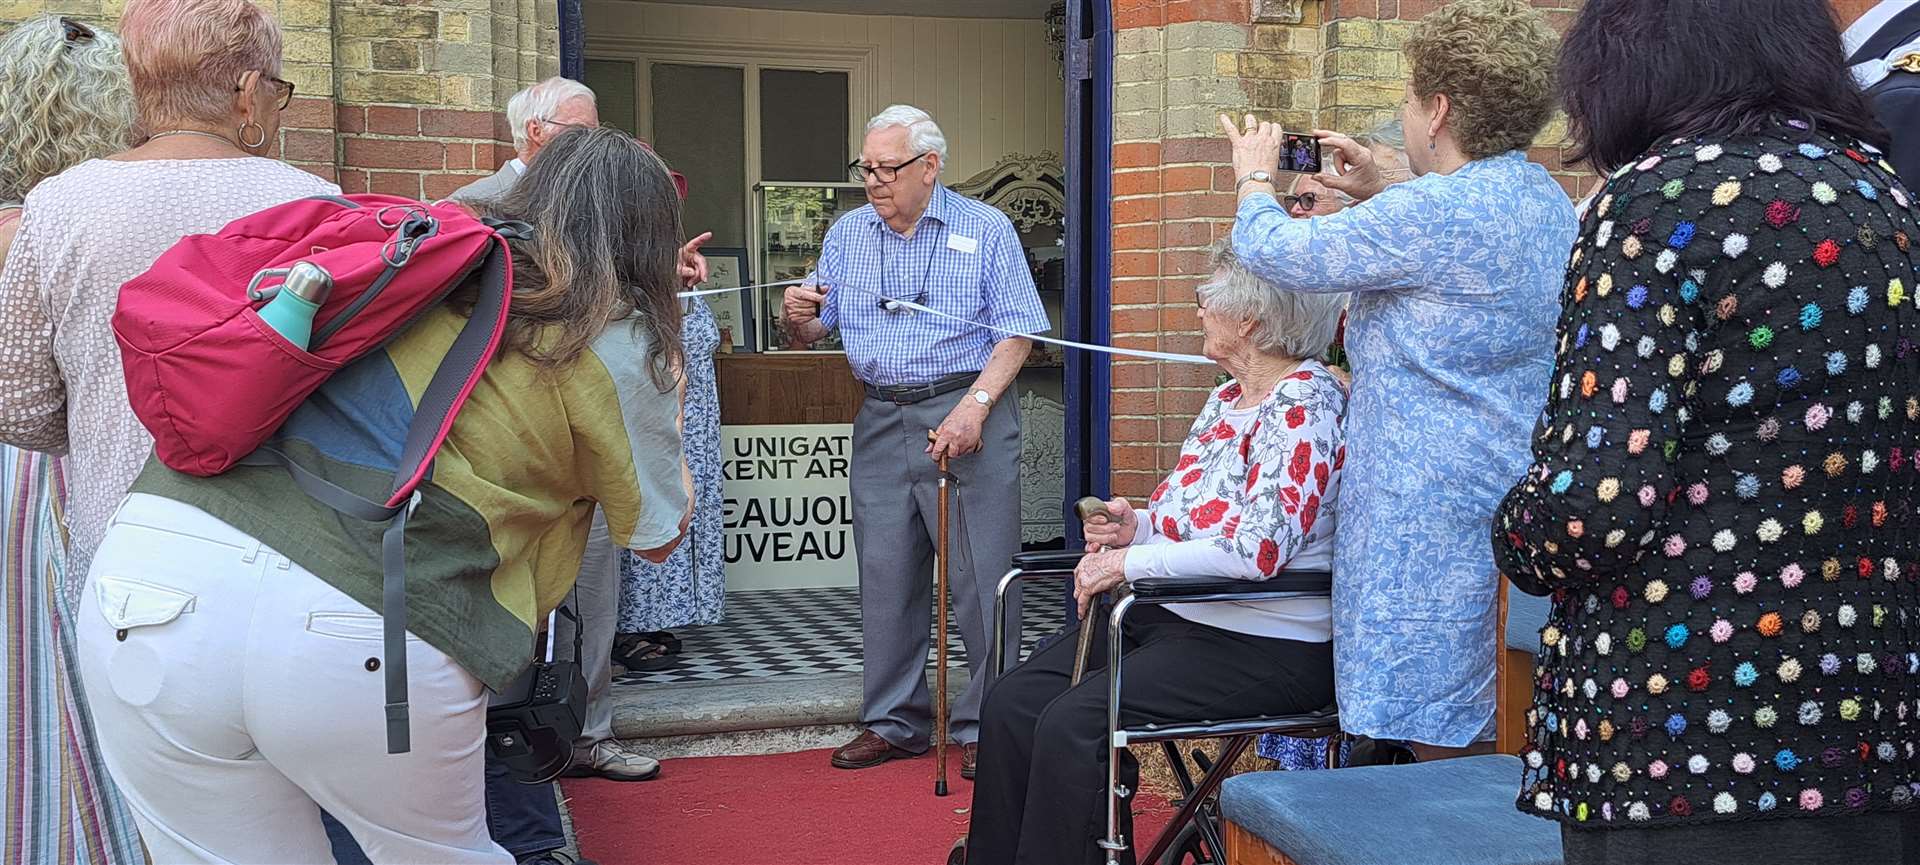 Ron Haggarty cuts the tape to open The Heart of Headcorn